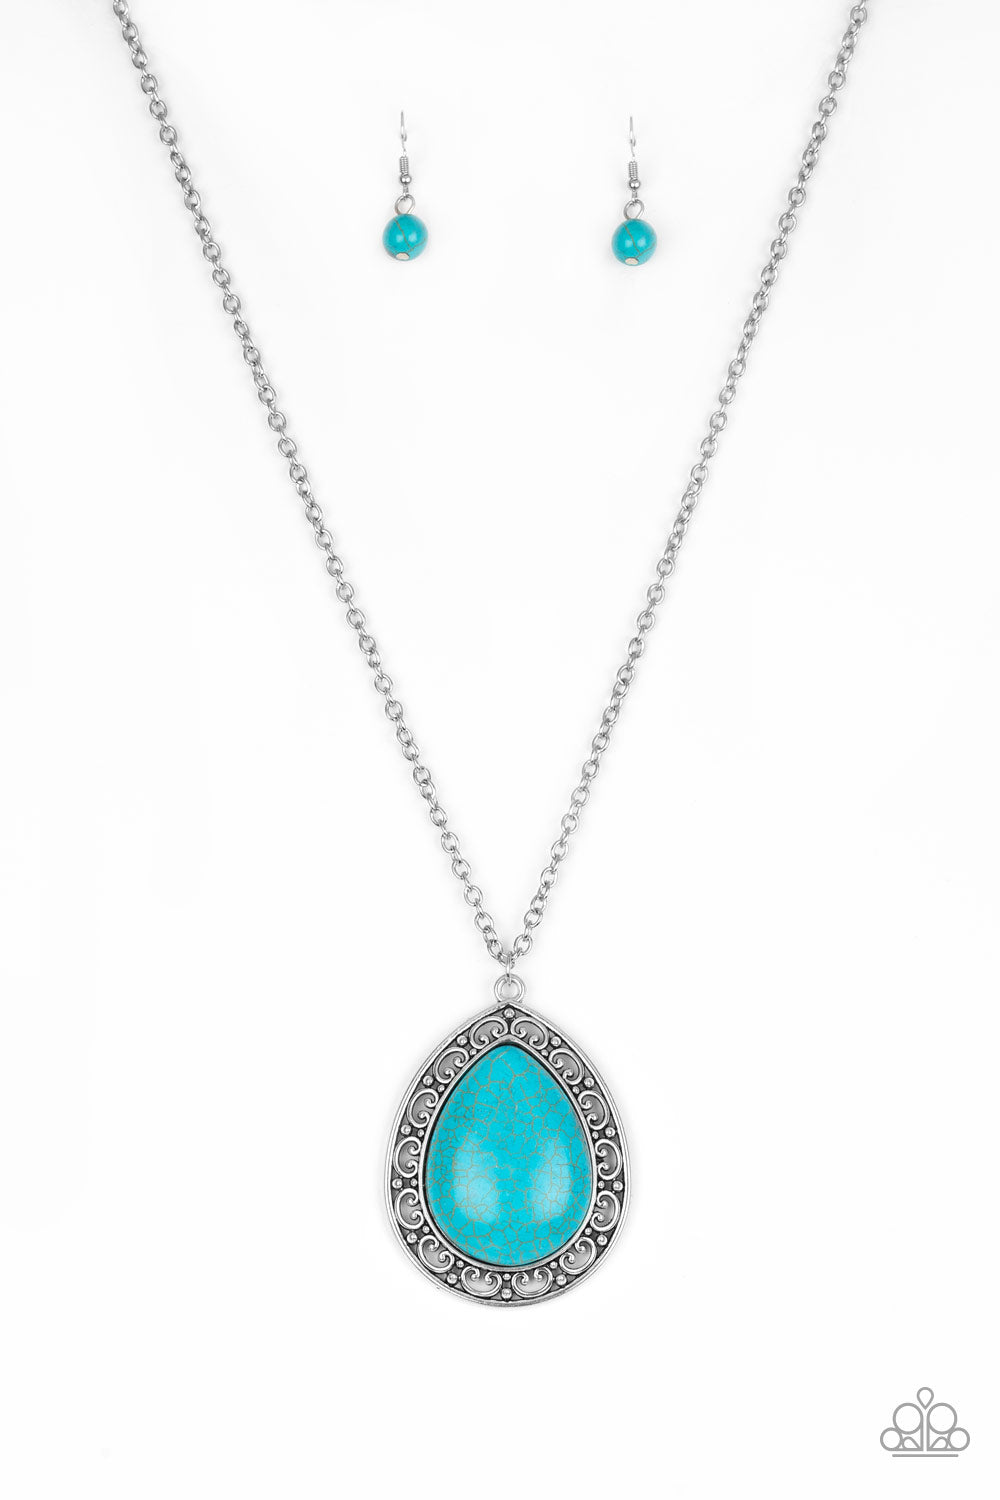 FULL FRONTIER - BLUE TURQUOISE TEARDROP NECKLACE